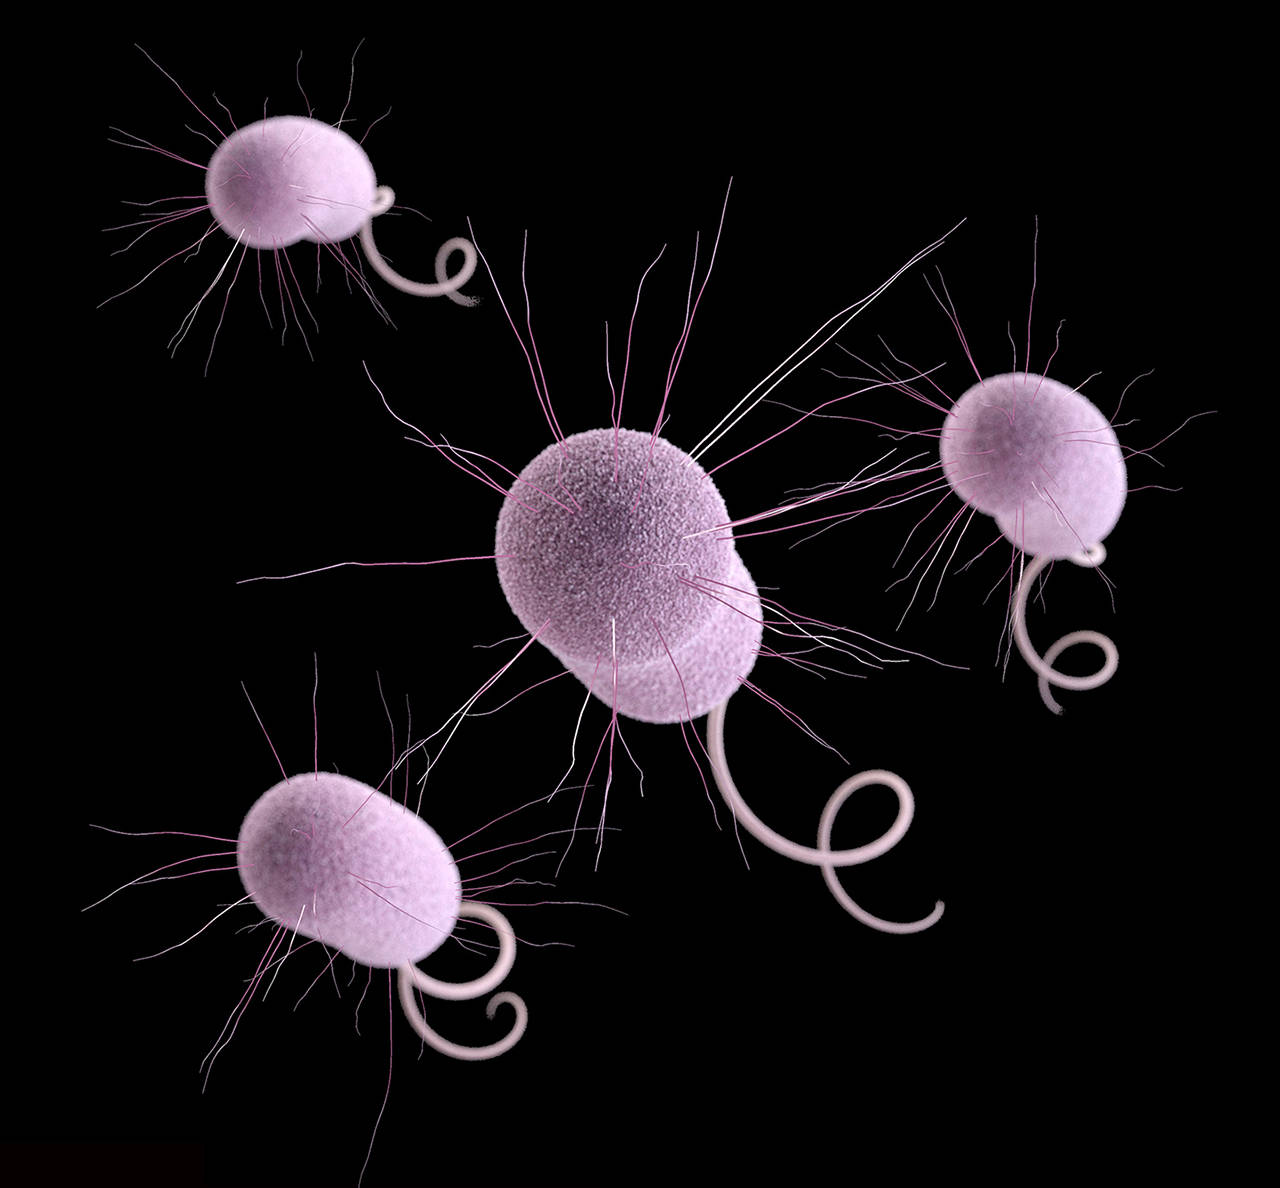 This illustration depicts Pseudomonas aeruginosa bacteria, one of the germs that can evolve to resist antibiotics. (CDC via AP, File)